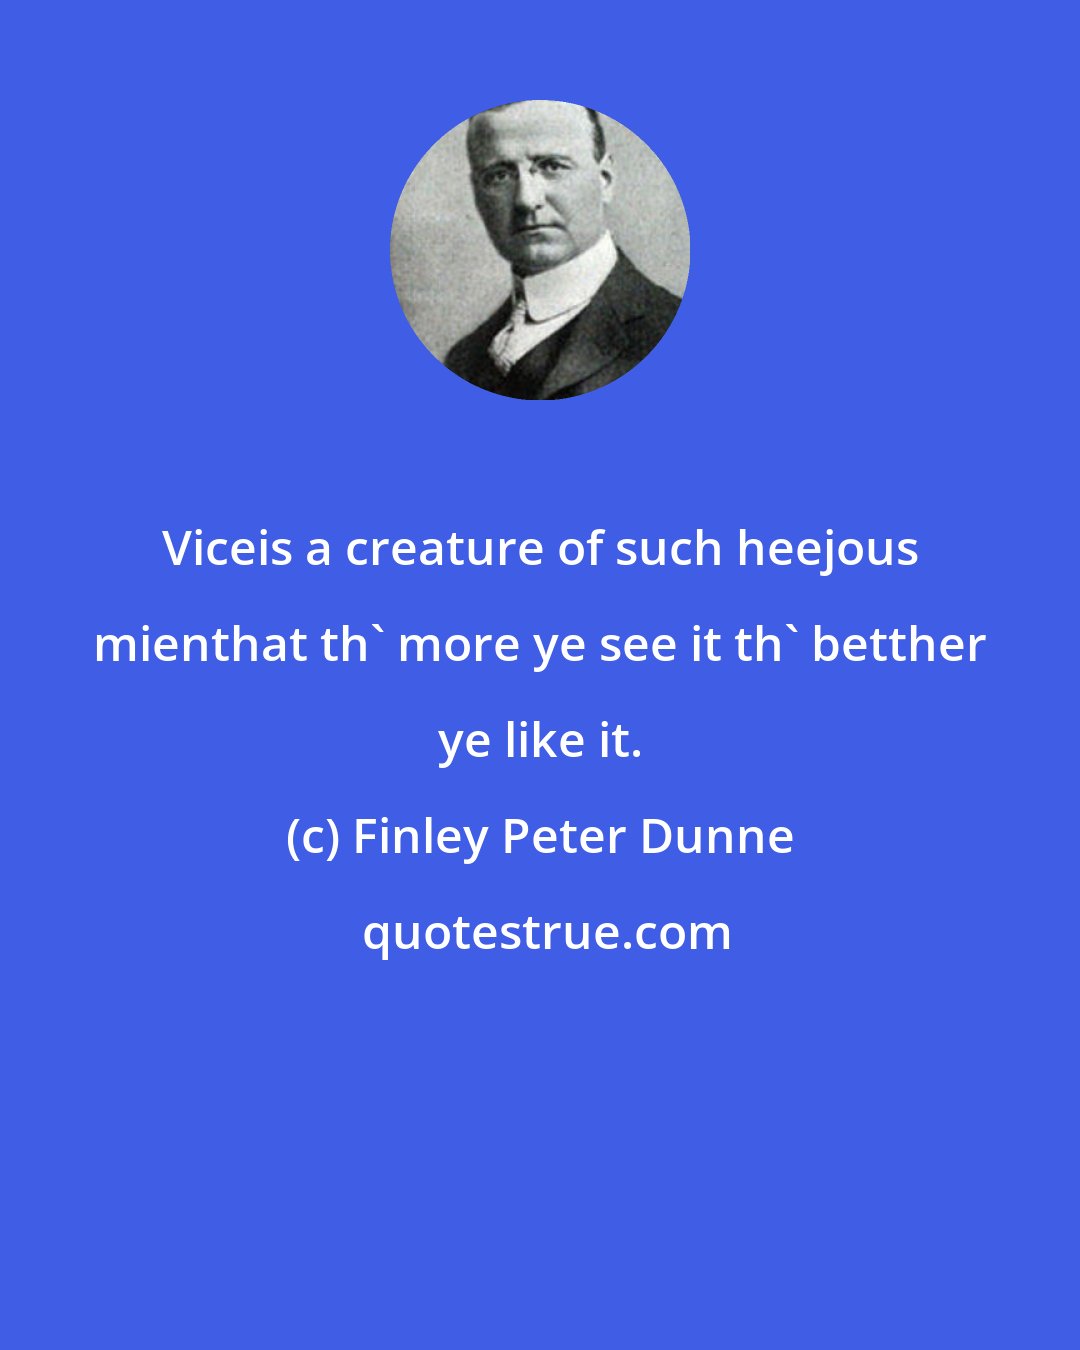 Finley Peter Dunne: Viceis a creature of such heejous mienthat th' more ye see it th' betther ye like it.